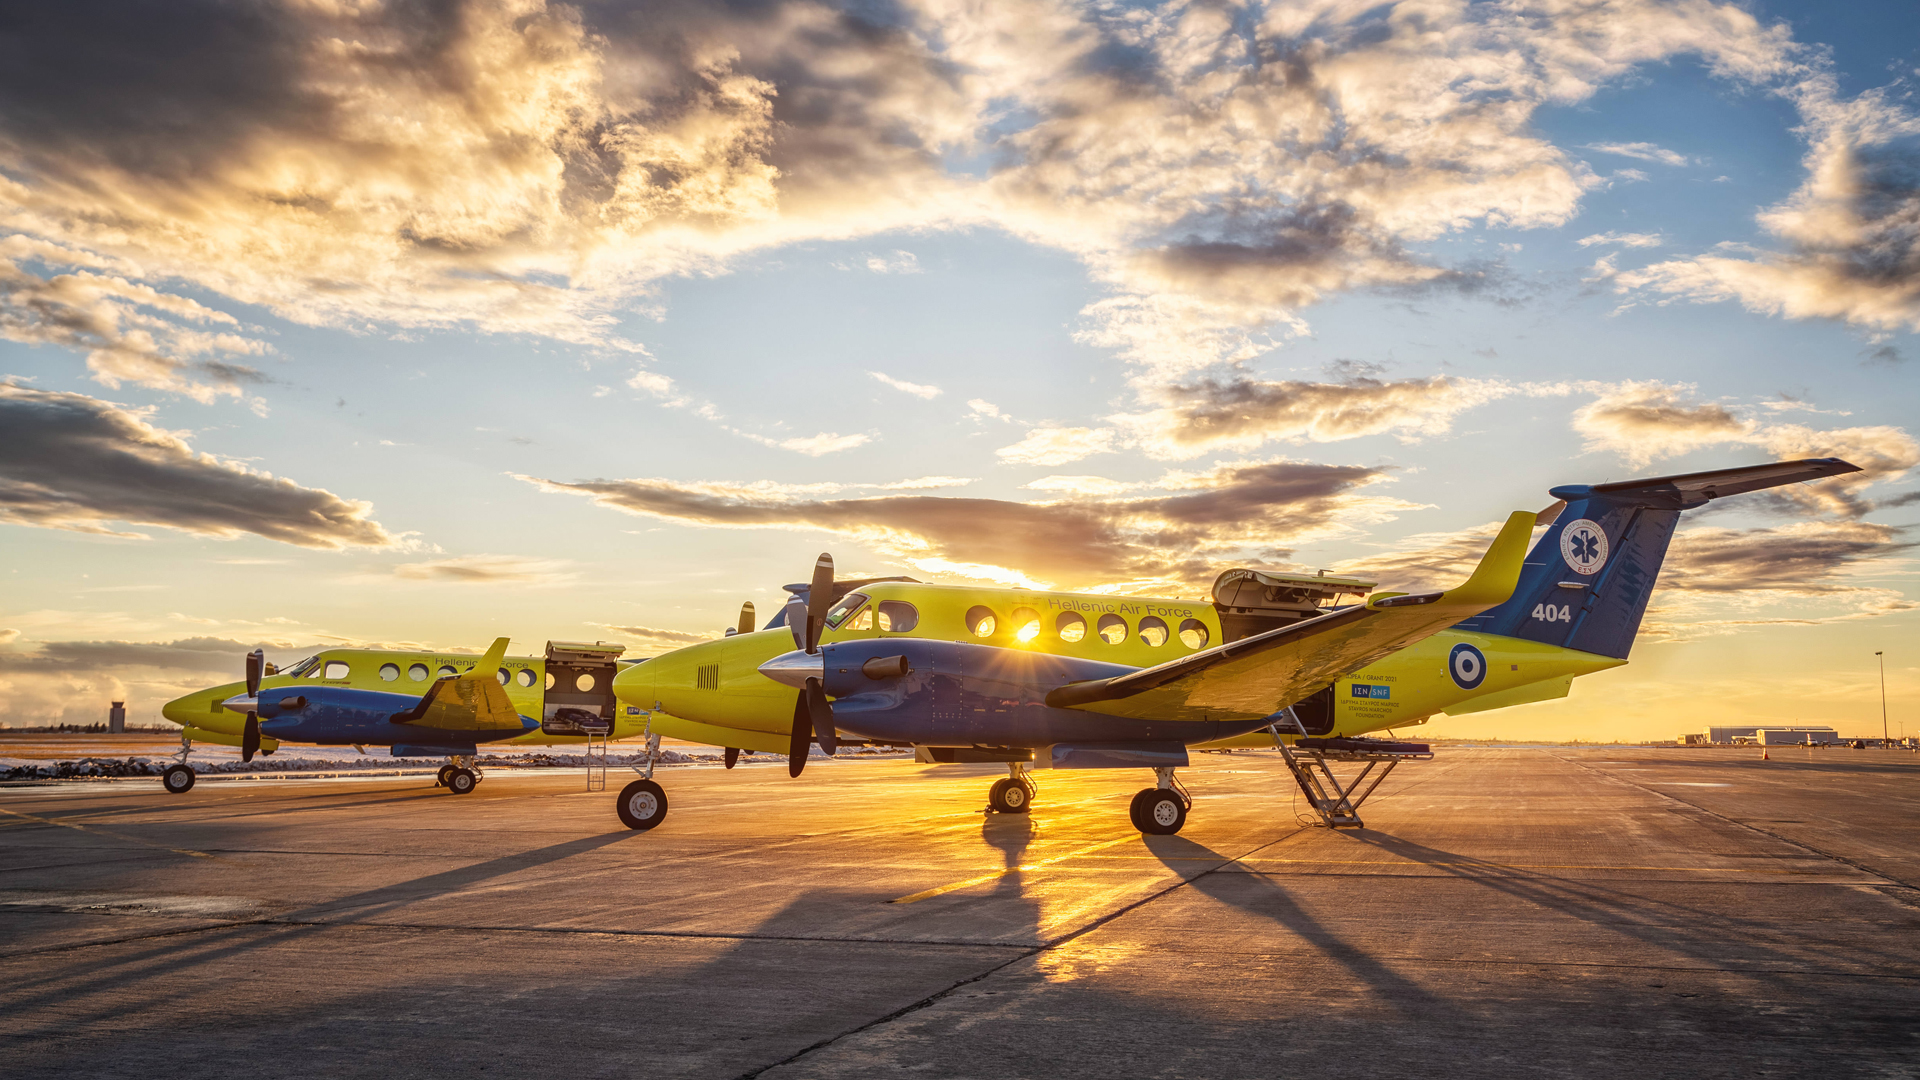 Two yellow and blue medevac propeller planes with the SNF logo sit on the tarmac as the sun sets in the background